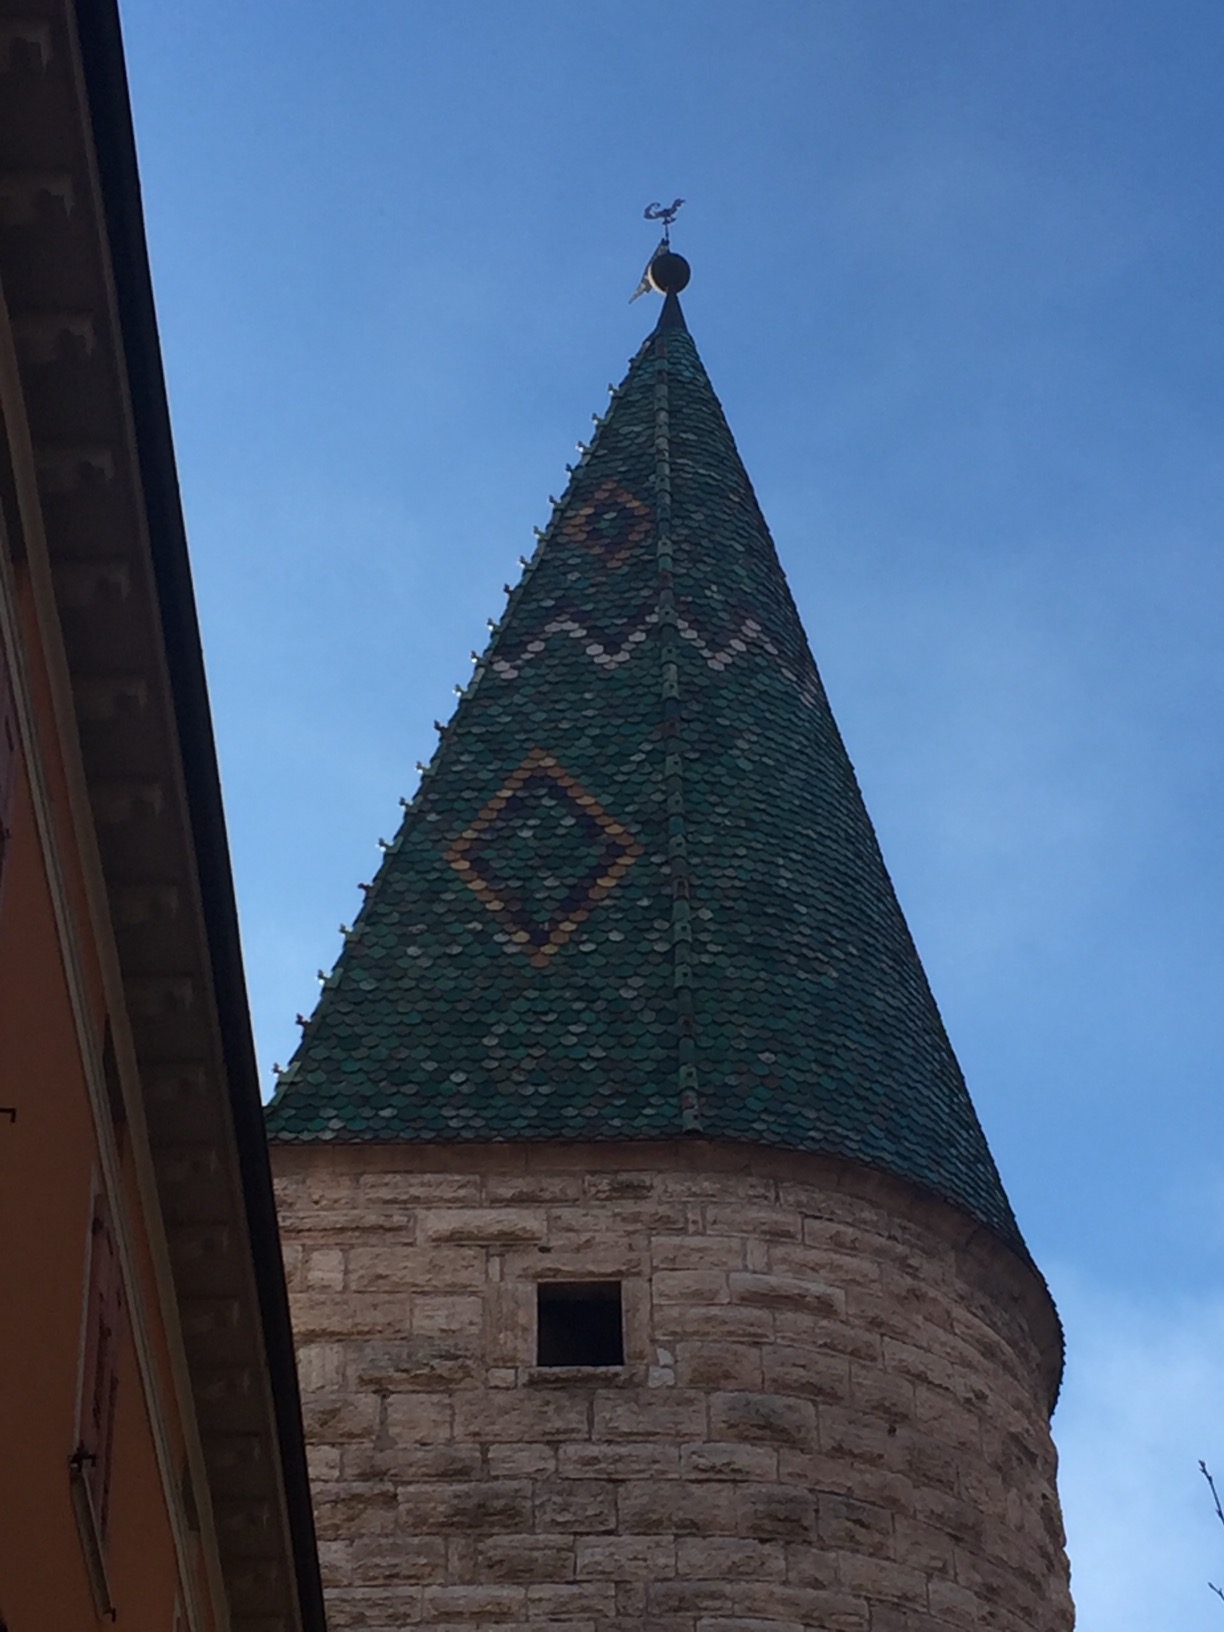 The top of an old tower of brown stones, with a steep, patterened green tile roof.